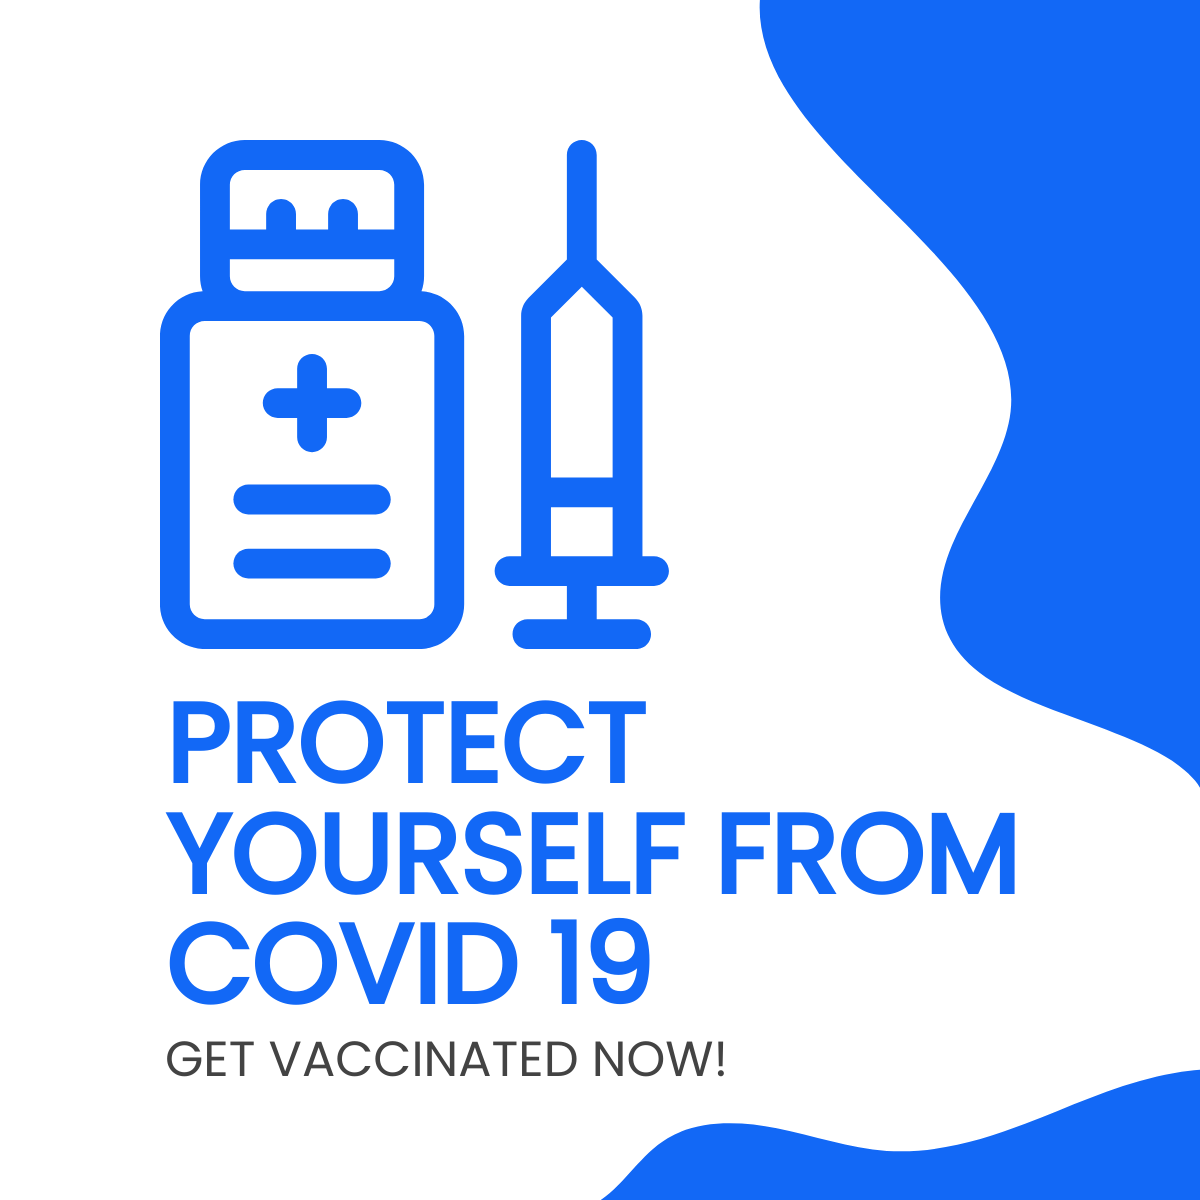 Free Covid 19 Vaccine Available Linkedin Post Template